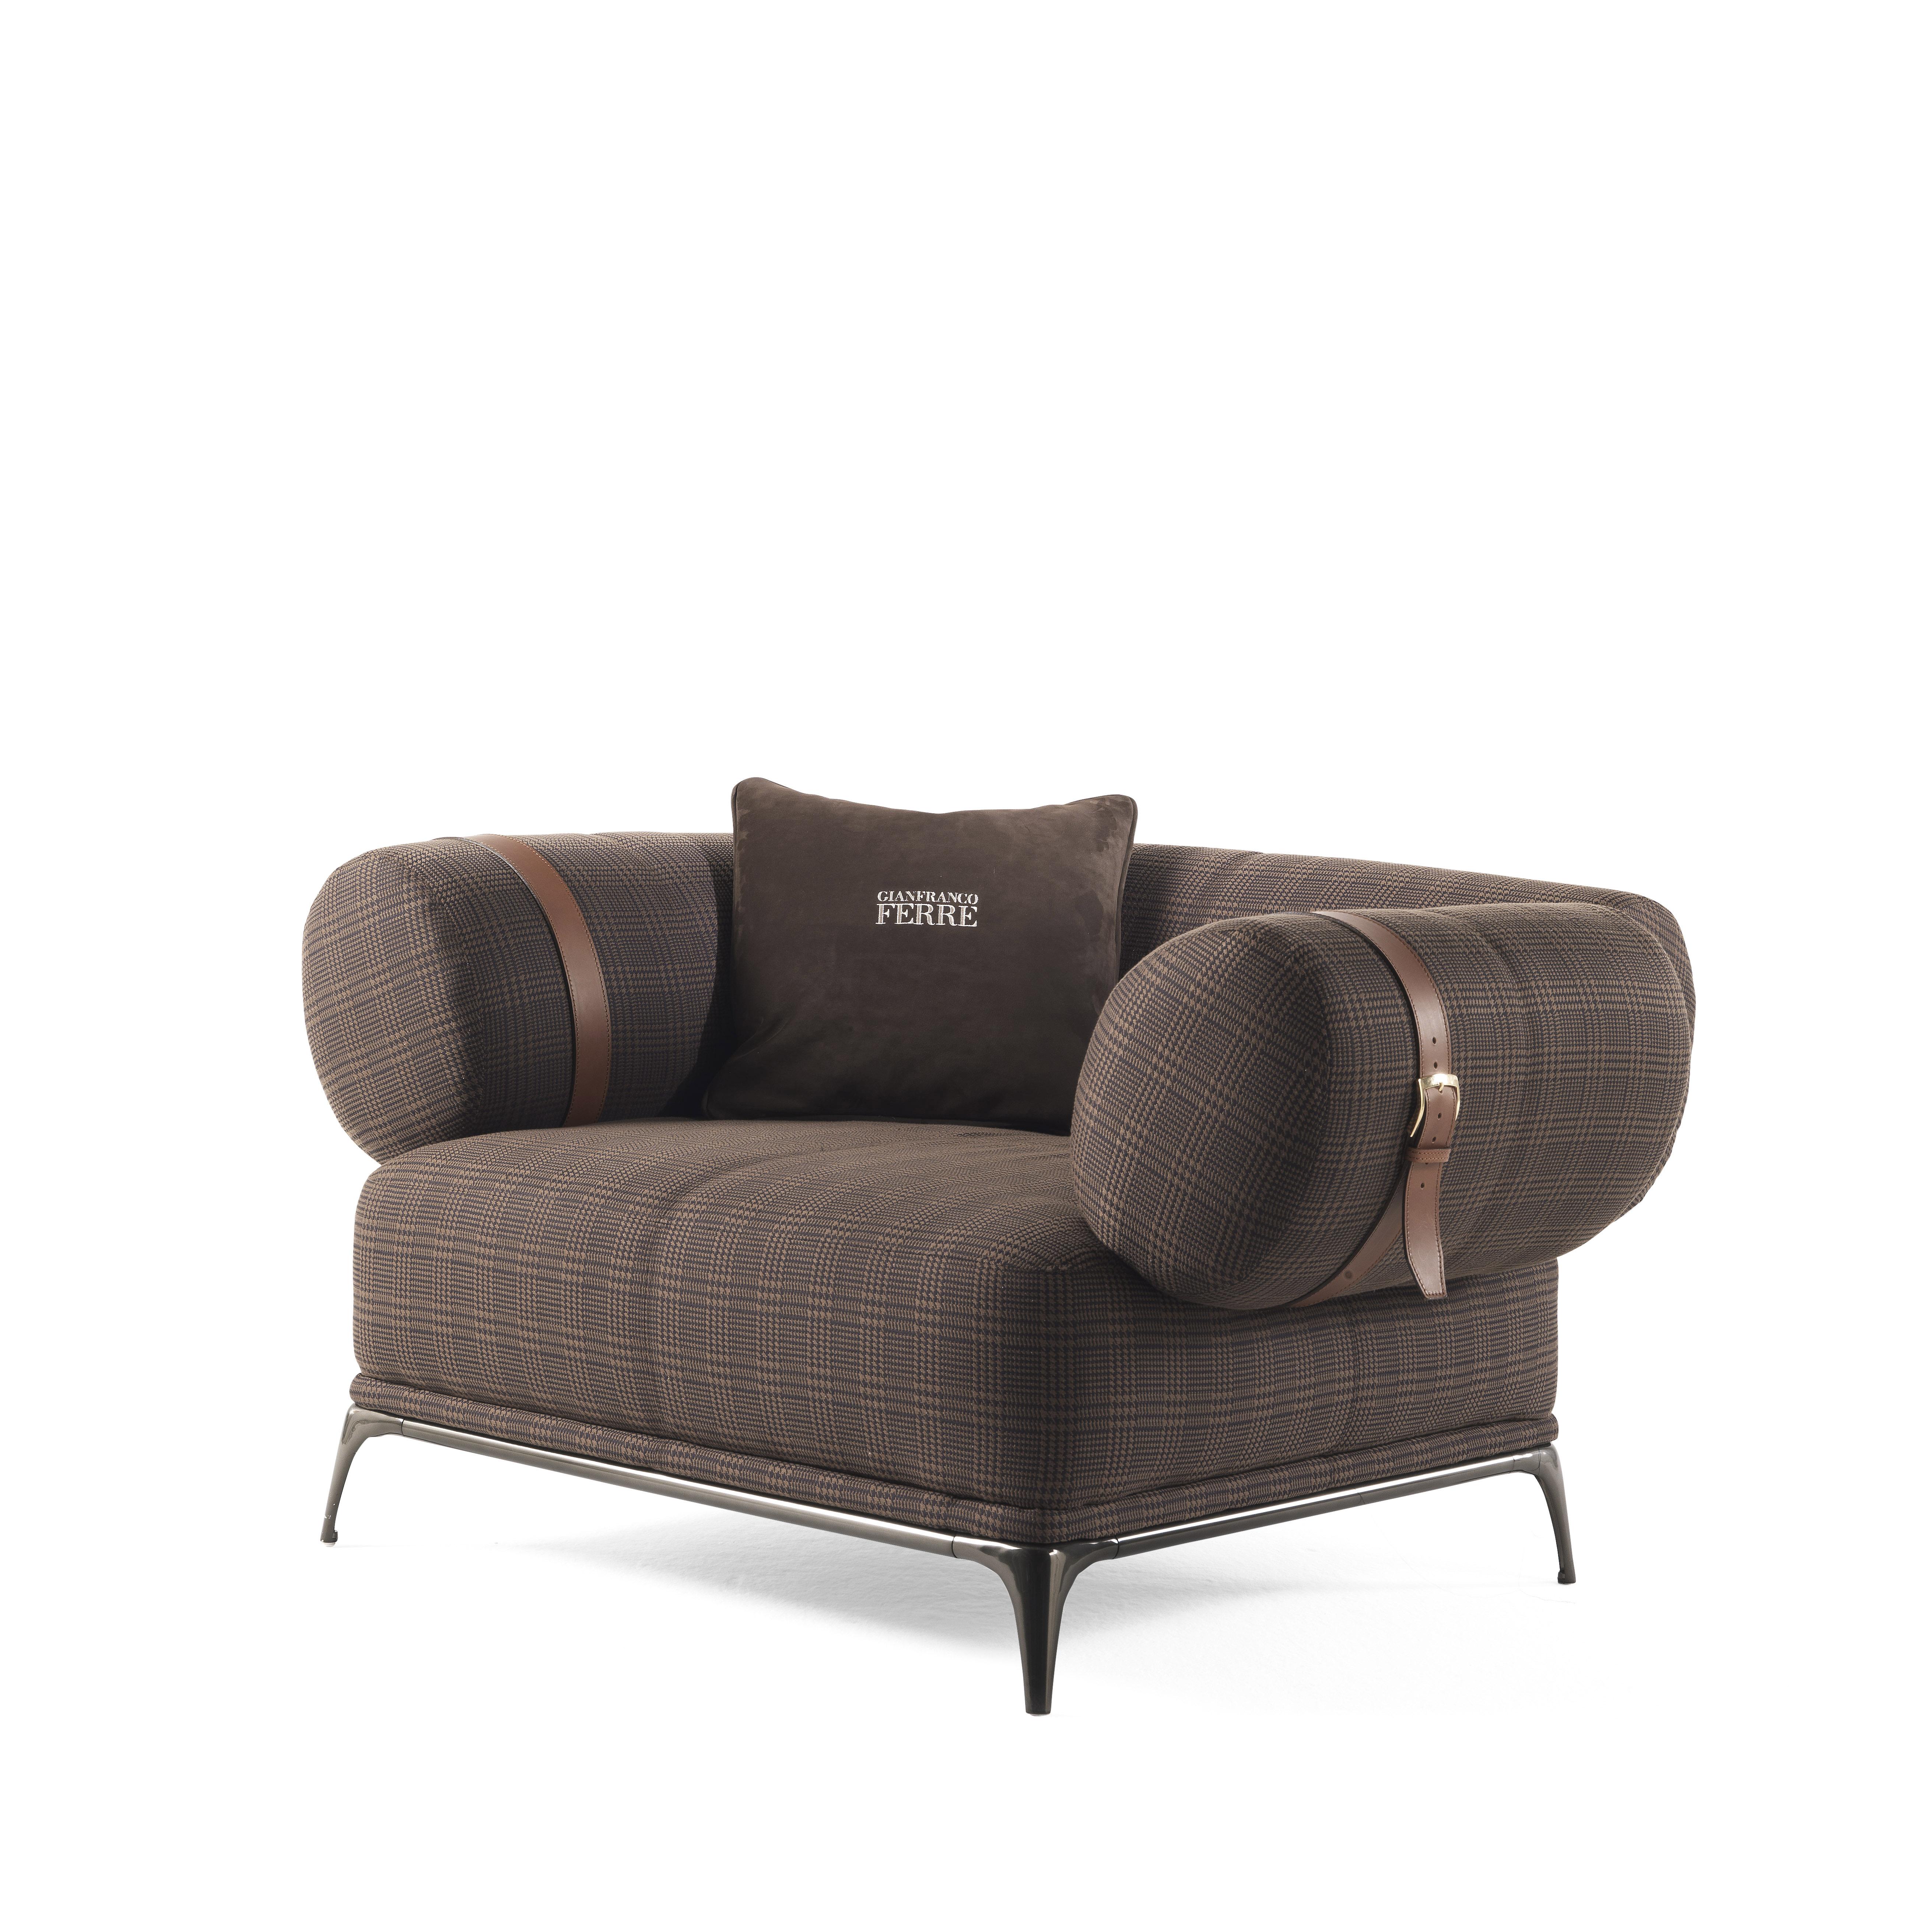 A revisited vintage style for the Phoenix armchair, featuring armrests and backrest with oval section, slightly inclined outwards and upholstered in brown and black Prince of Wales fabric. The reference to Gianfranco Ferré heritage, present in the